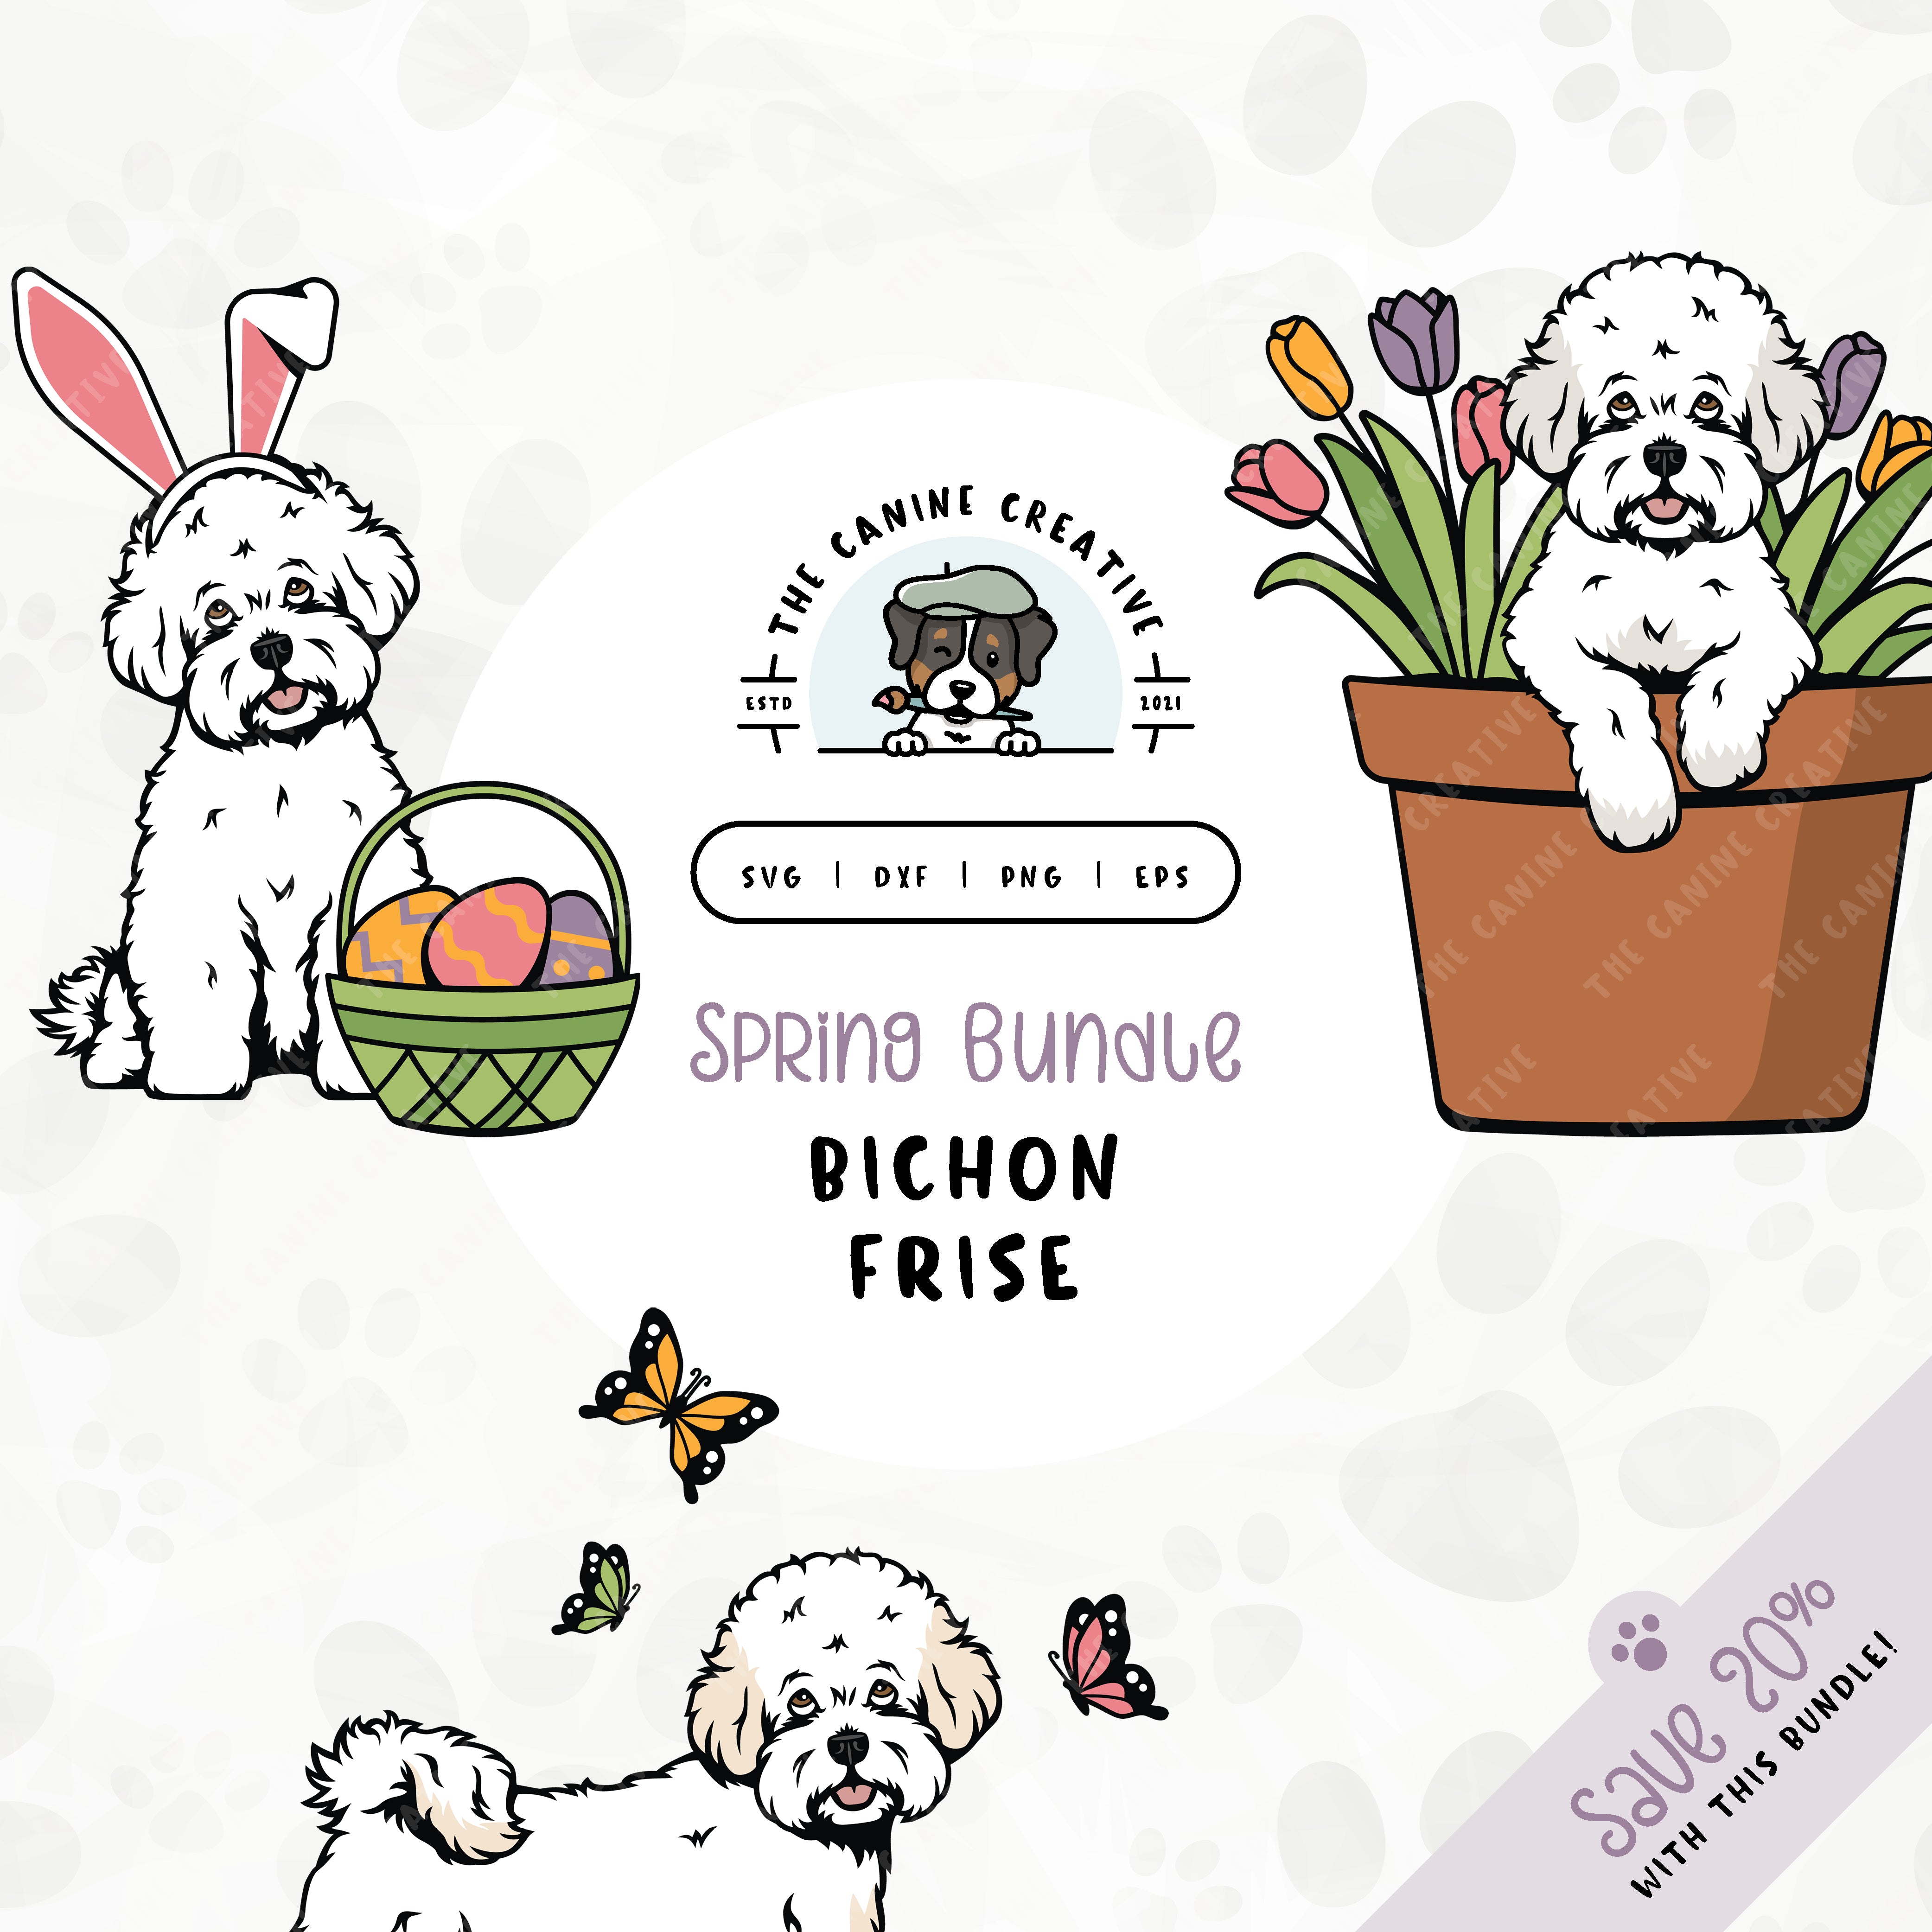 This 3-pack springtime illustration bundle features Bichons Frises among colorful butterflies, peeking out from a pot of vibrant tulips, and wearing festive bunny ears while sitting near a basket of brightly-colored Easter eggs. File formats include: SVG, DXF, PNG, and EPS.